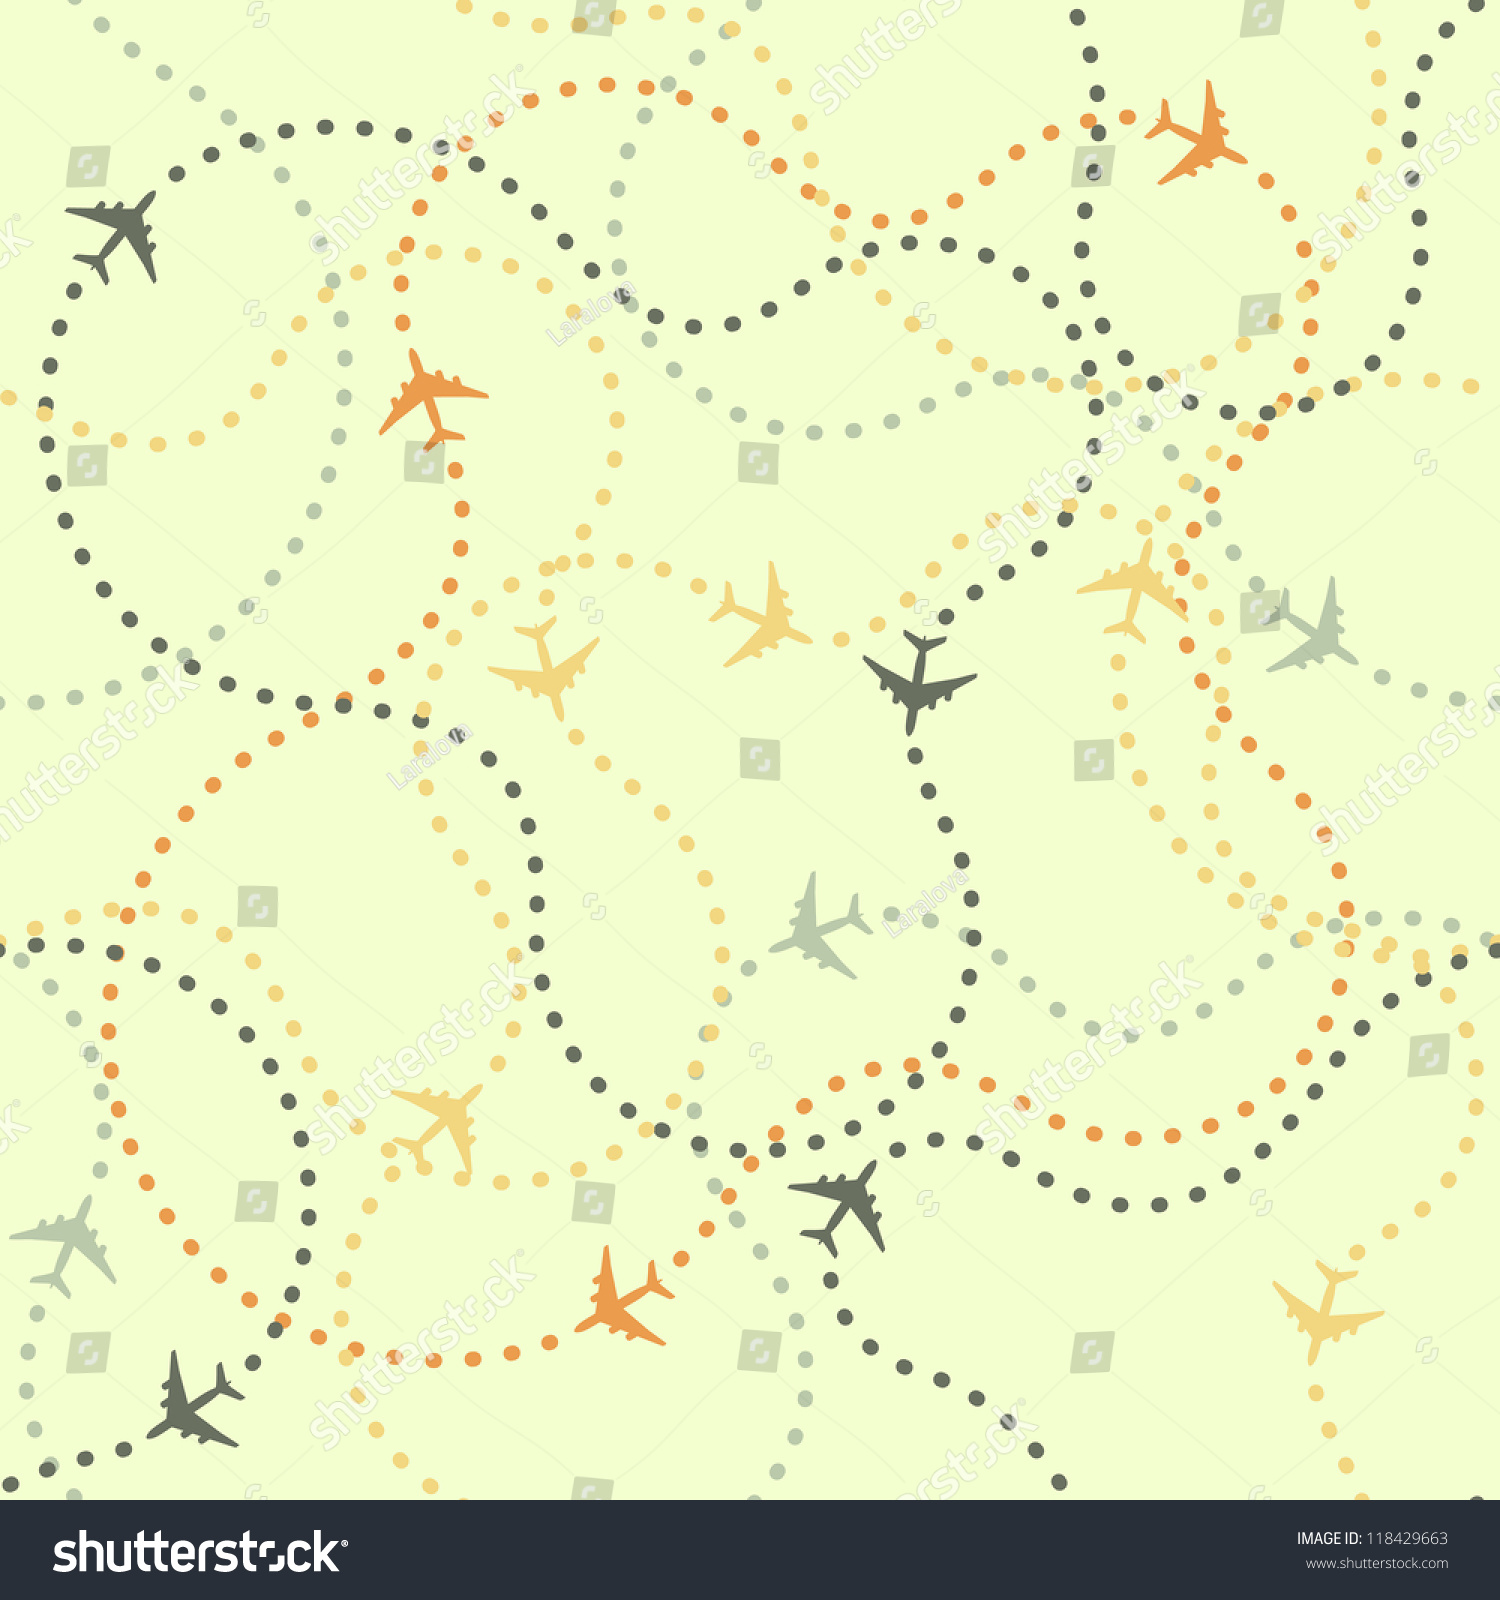 Seamless Background Pattern Airplane Routes Vector Stock Vector ...